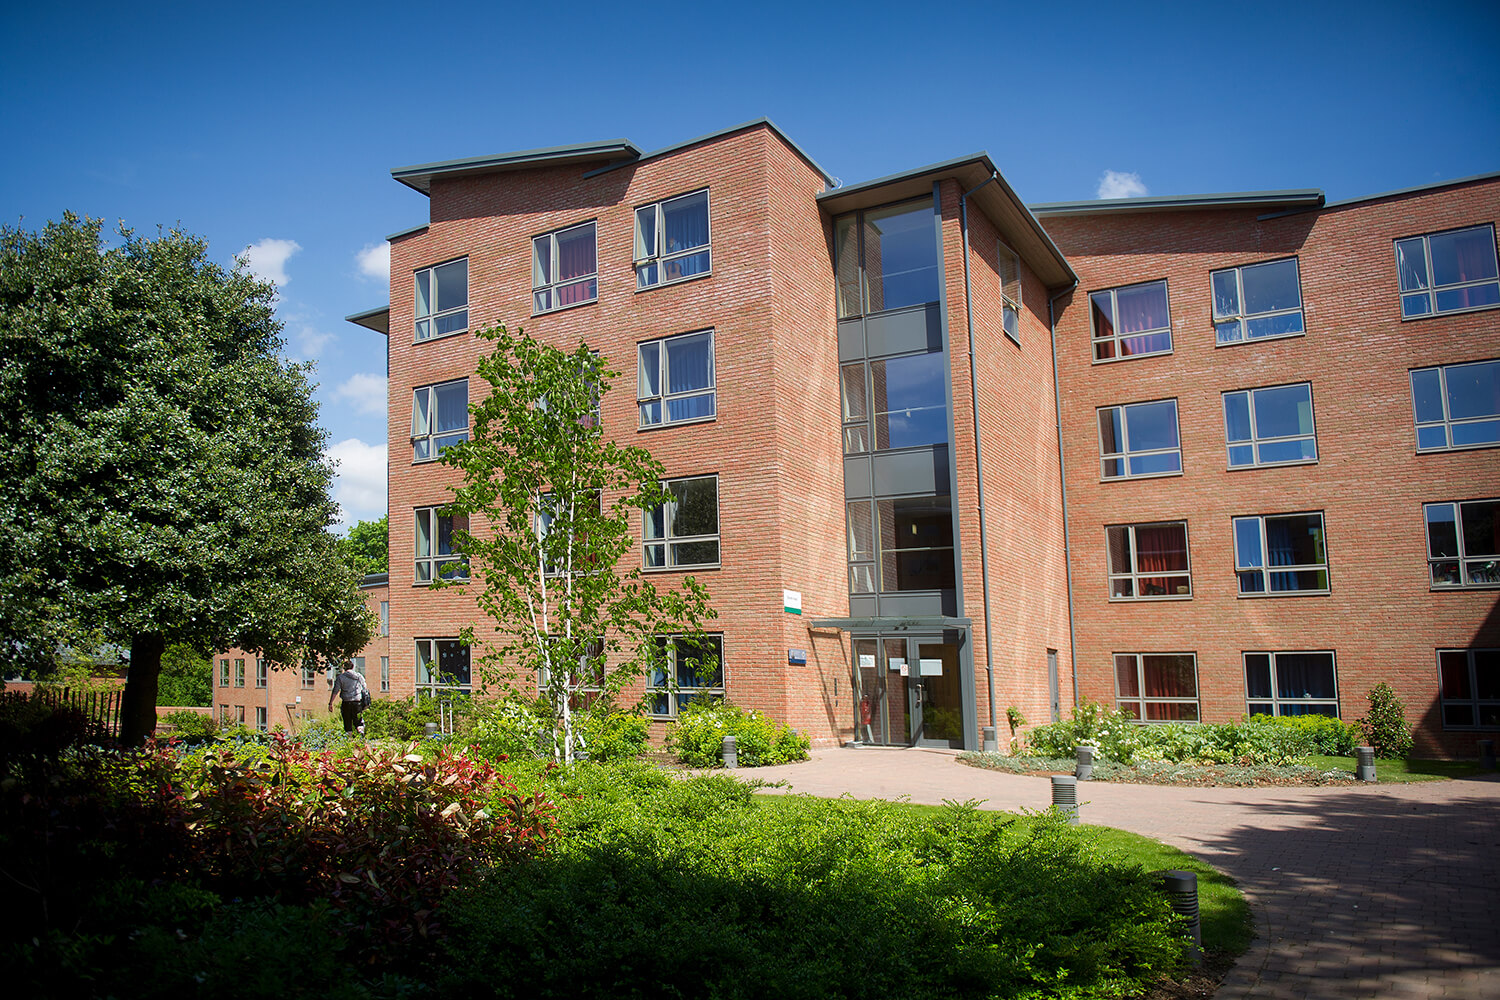 Exterior of Founders' halls of residence.